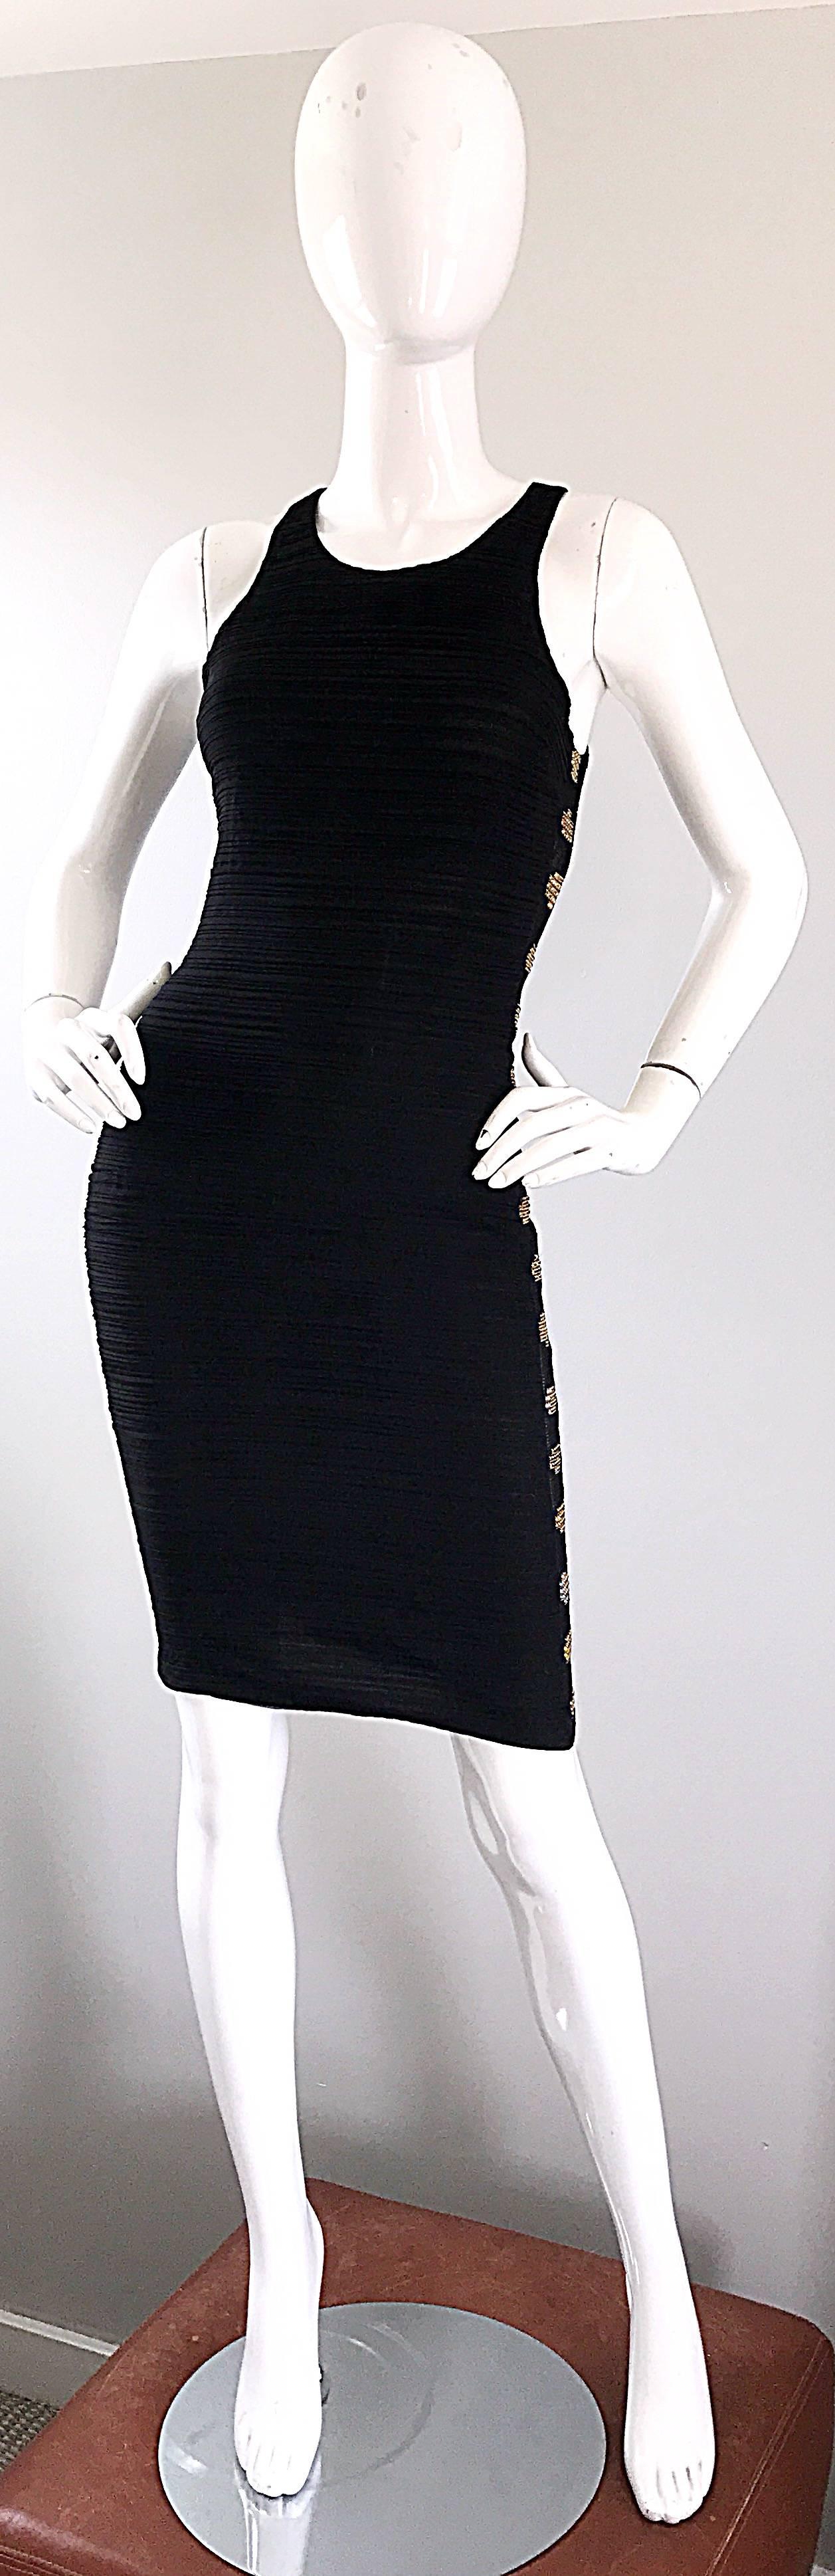 2000s Gianni Versace Black Silk Side Cut Out Rhinestone Bodycon Vintage Dress  For Sale 2